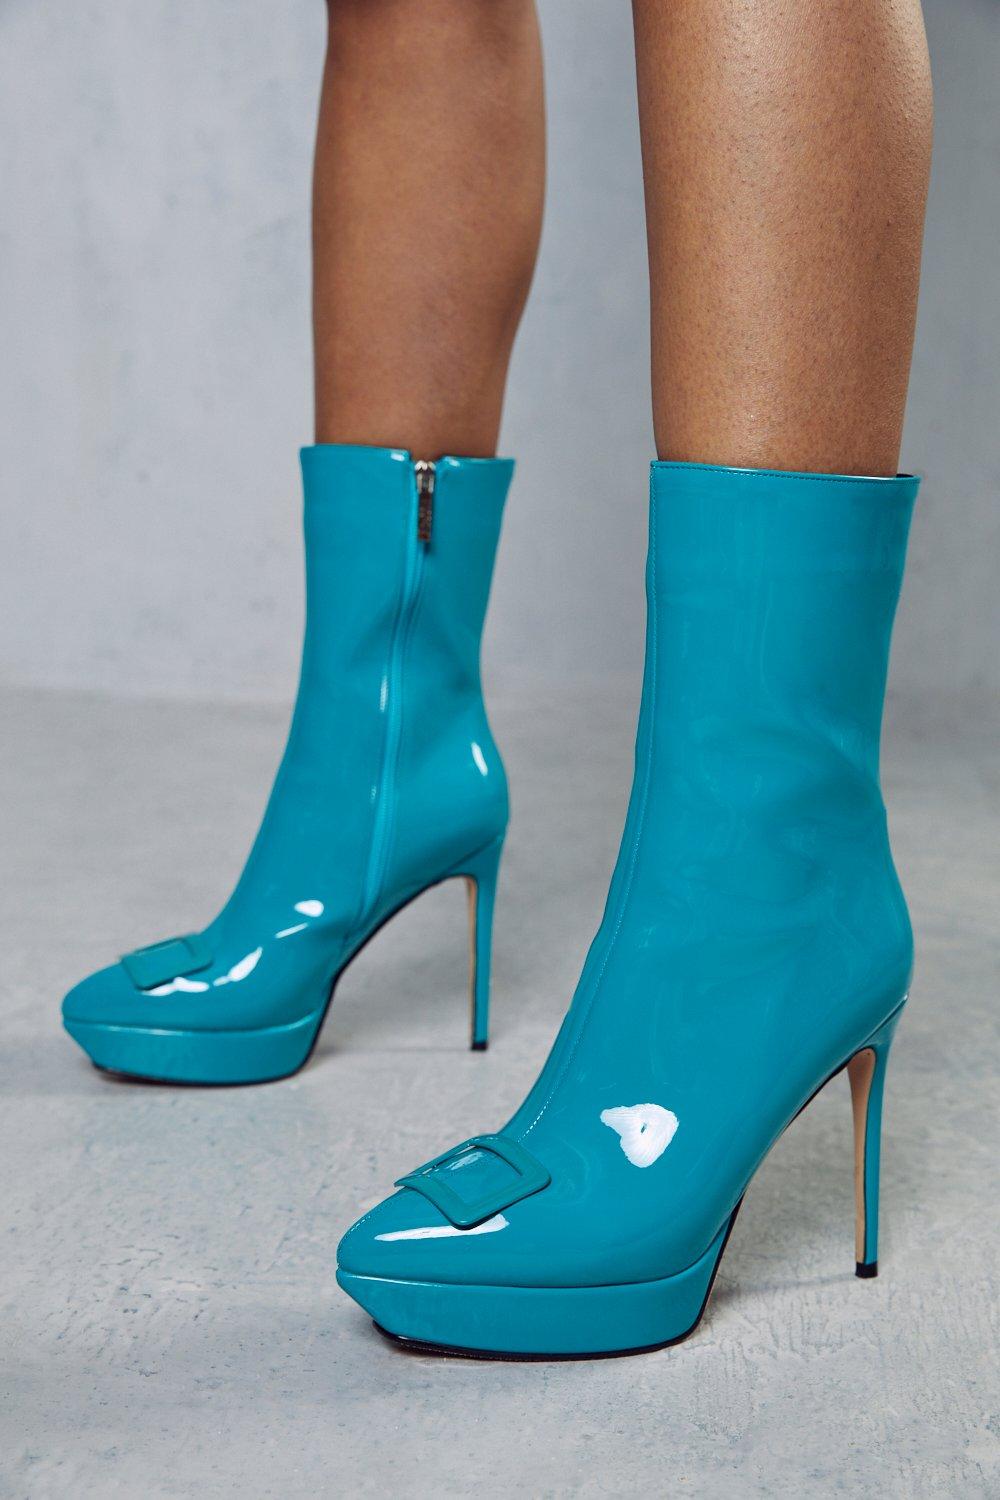 womens high shine buckle detail ankle boots - teal - 3, teal